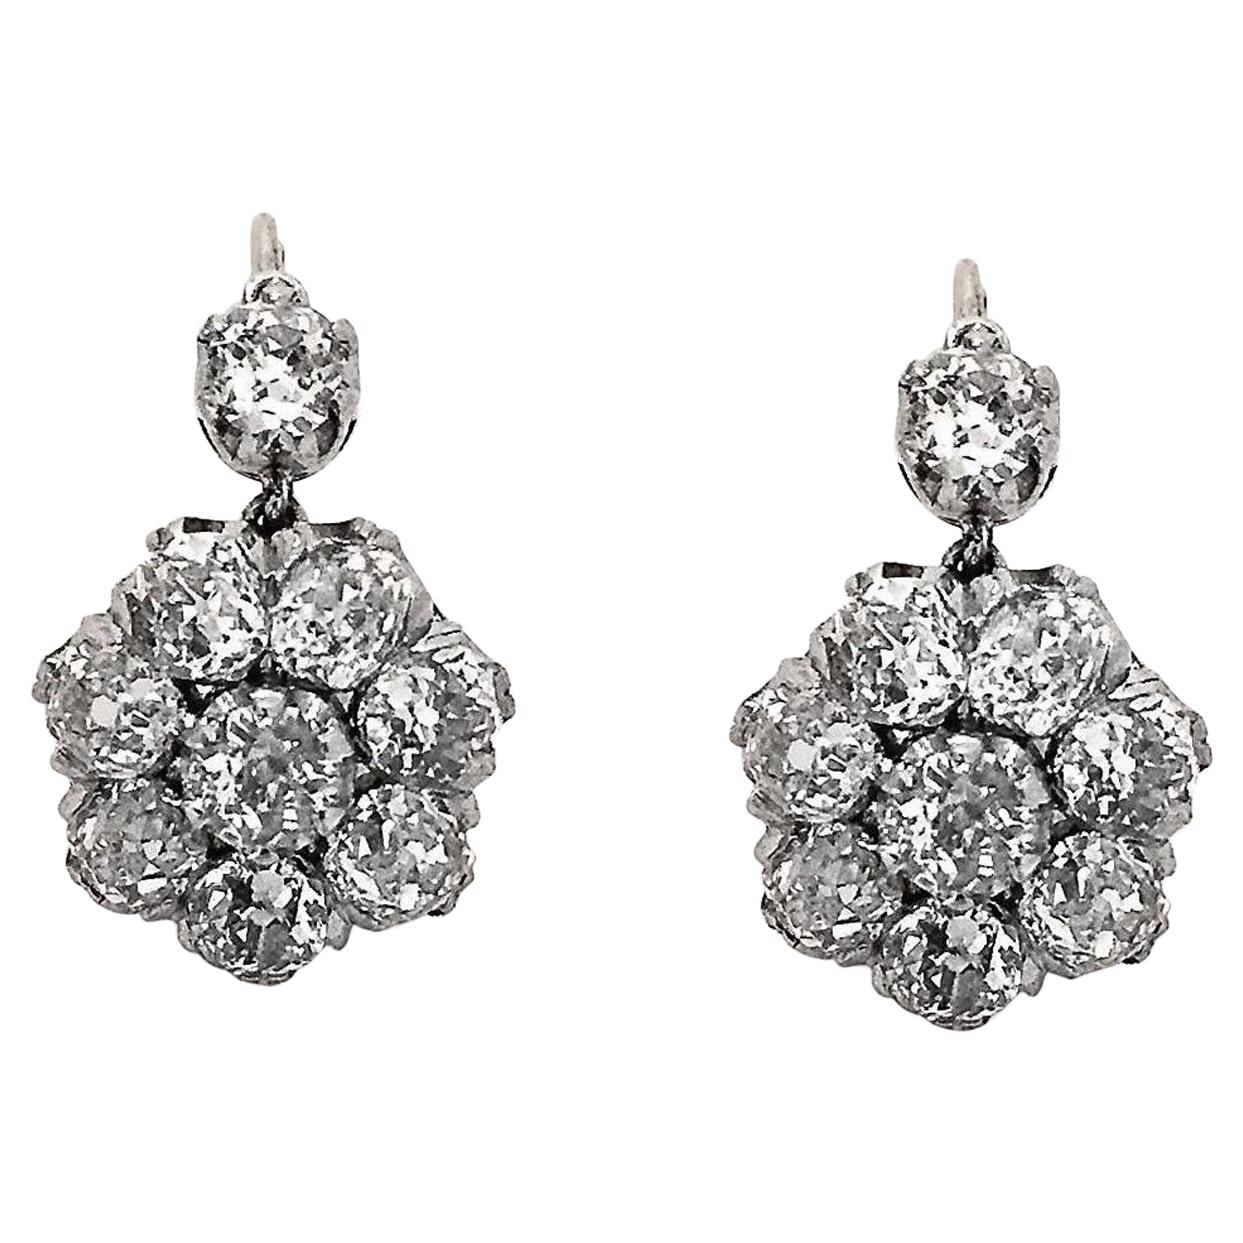 Original Victorian Flower Cluster Diamond Drop Earrings. Perfect for everyday wear into the evening!
All original, we love the front closure true to the Victorian era. 
Approximately 3.50 CTW of old mine diamonds set into a flower cluster dangling